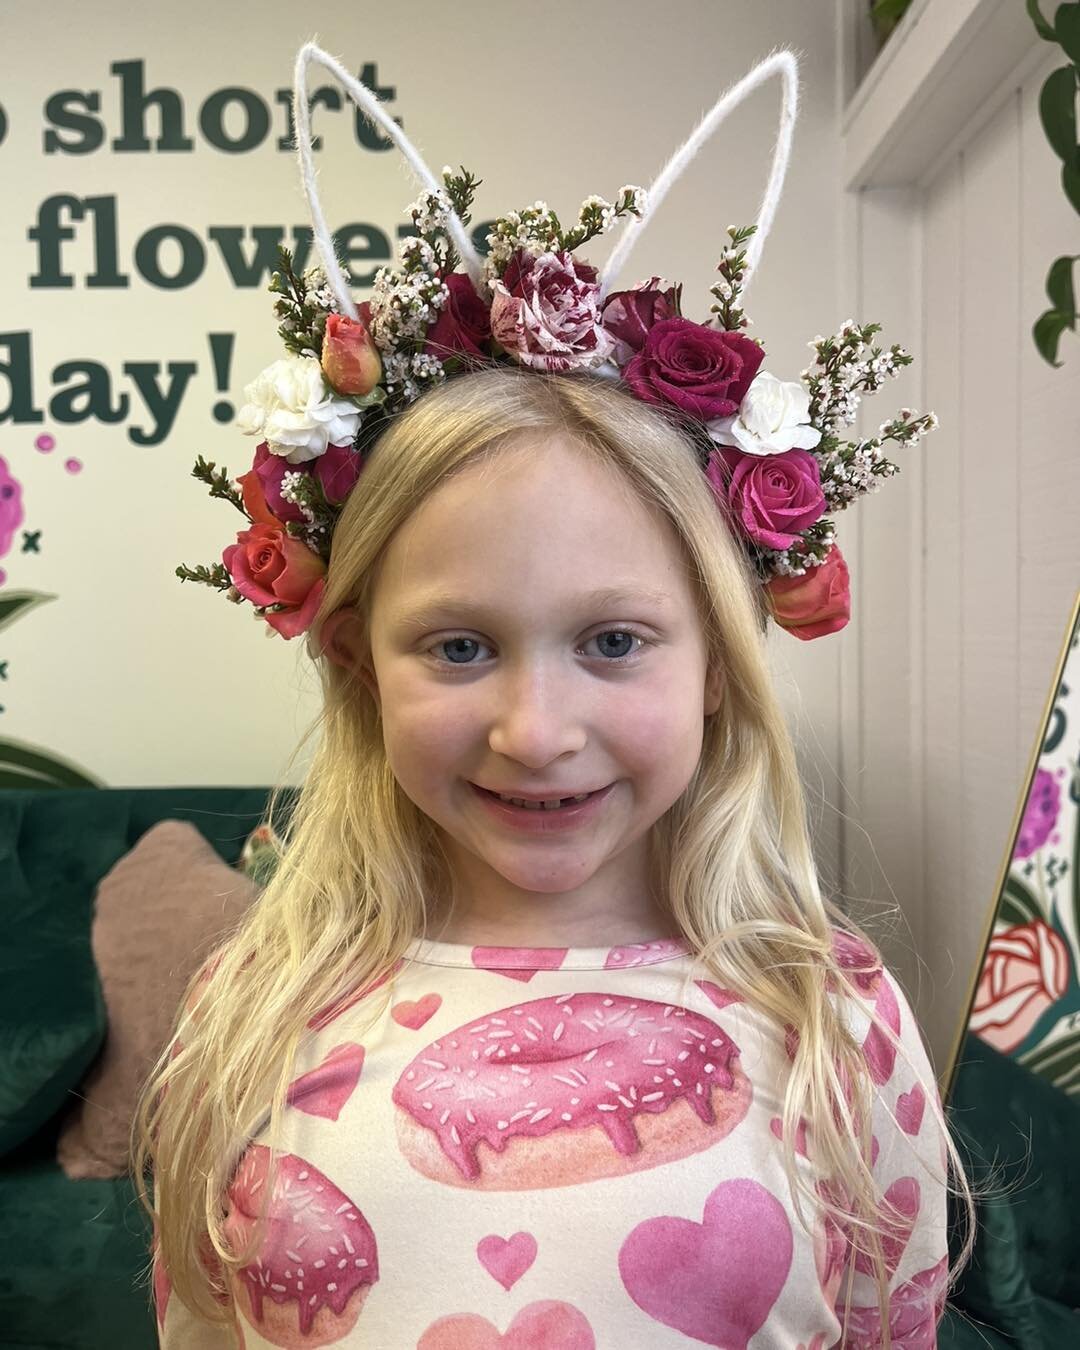 Hop into the weekend with this adorable Easter bunny flower crown! 🐣🌸🥚🌼🌷🐰👑💐

Only 8 are left @ $45.99!!! 

SHOP NOW ➡️➡️ https://www.theflowerdaddy.com/shop-1/easter-bunny-crown

#theflowerdaddy #happyeaster #flowercrown #flowerofinstagram #f